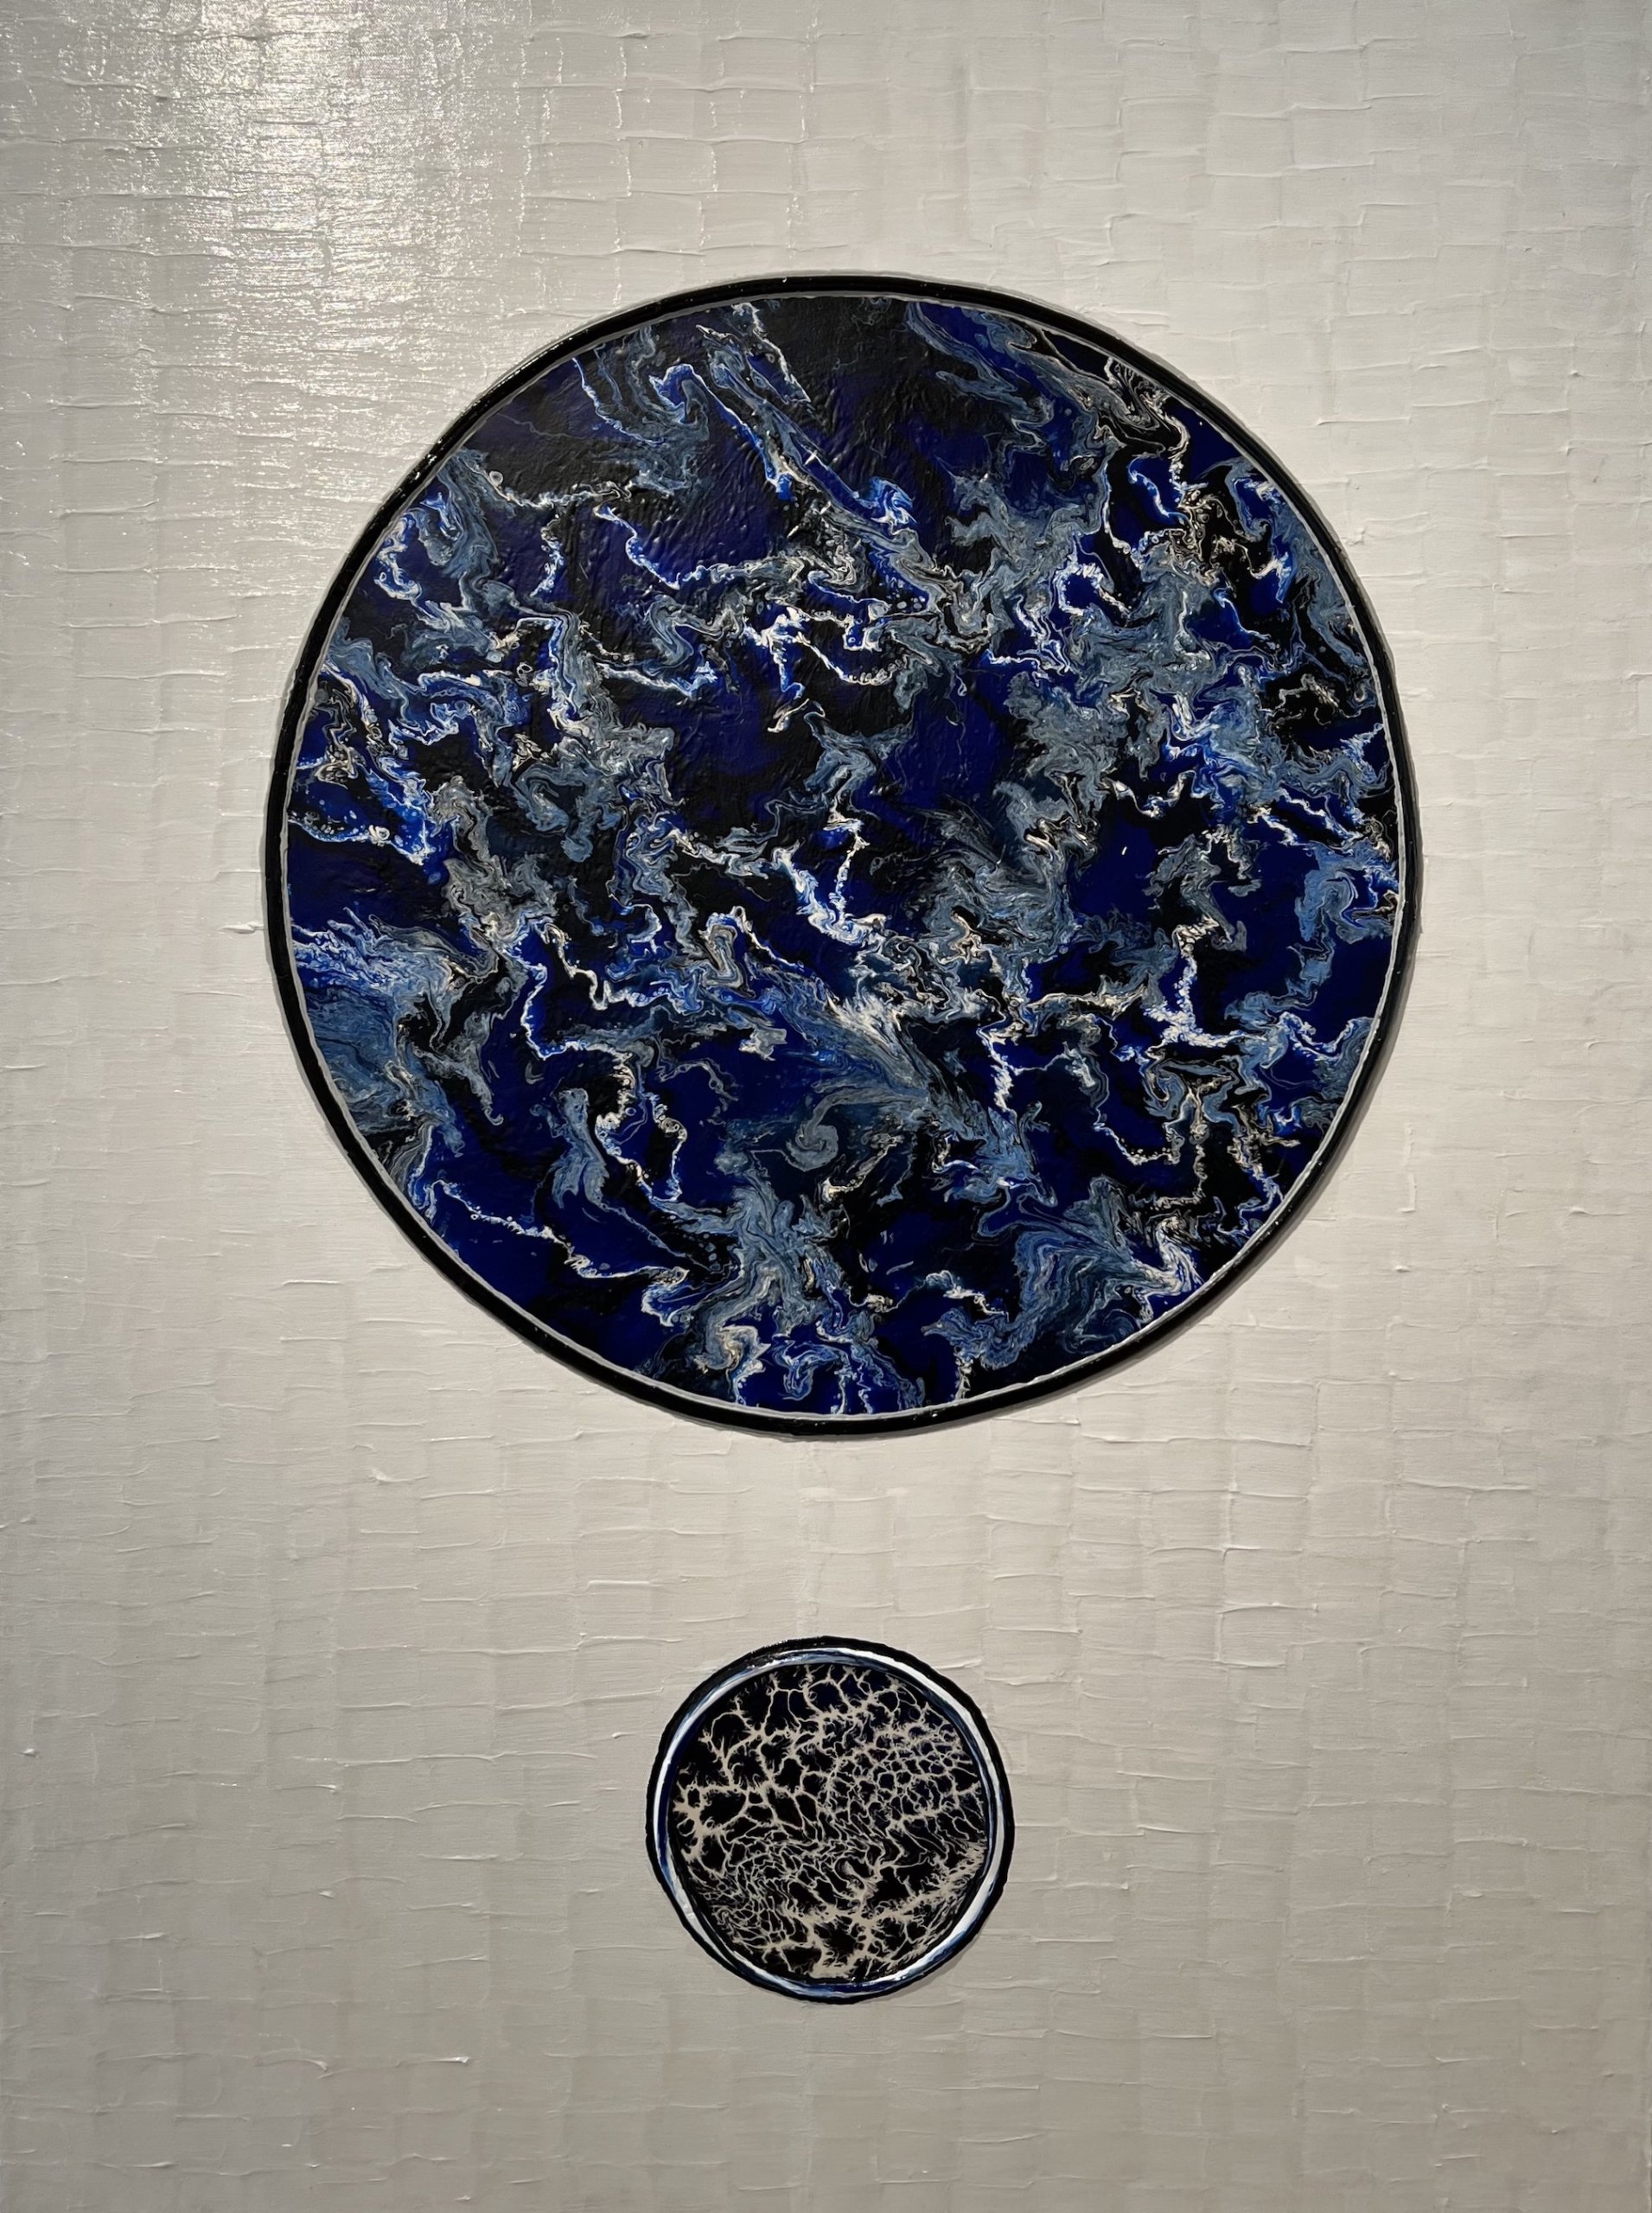 Chris Lucore's "The Blue Planet" (2022, 48" x 36") on view at the Lucore 